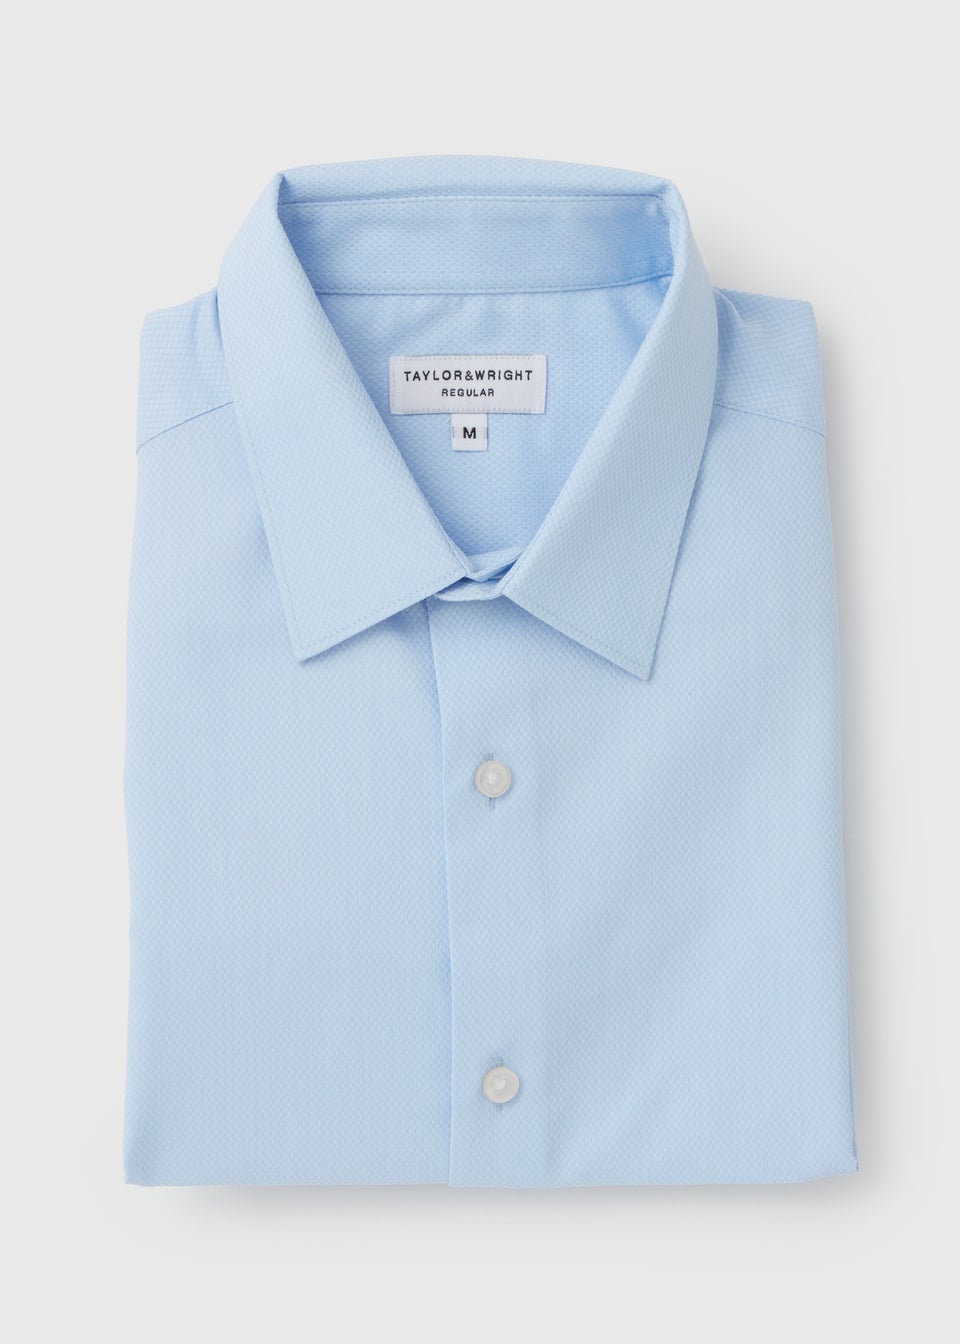 Taylor & Wright Blue Textured Formal Shirt